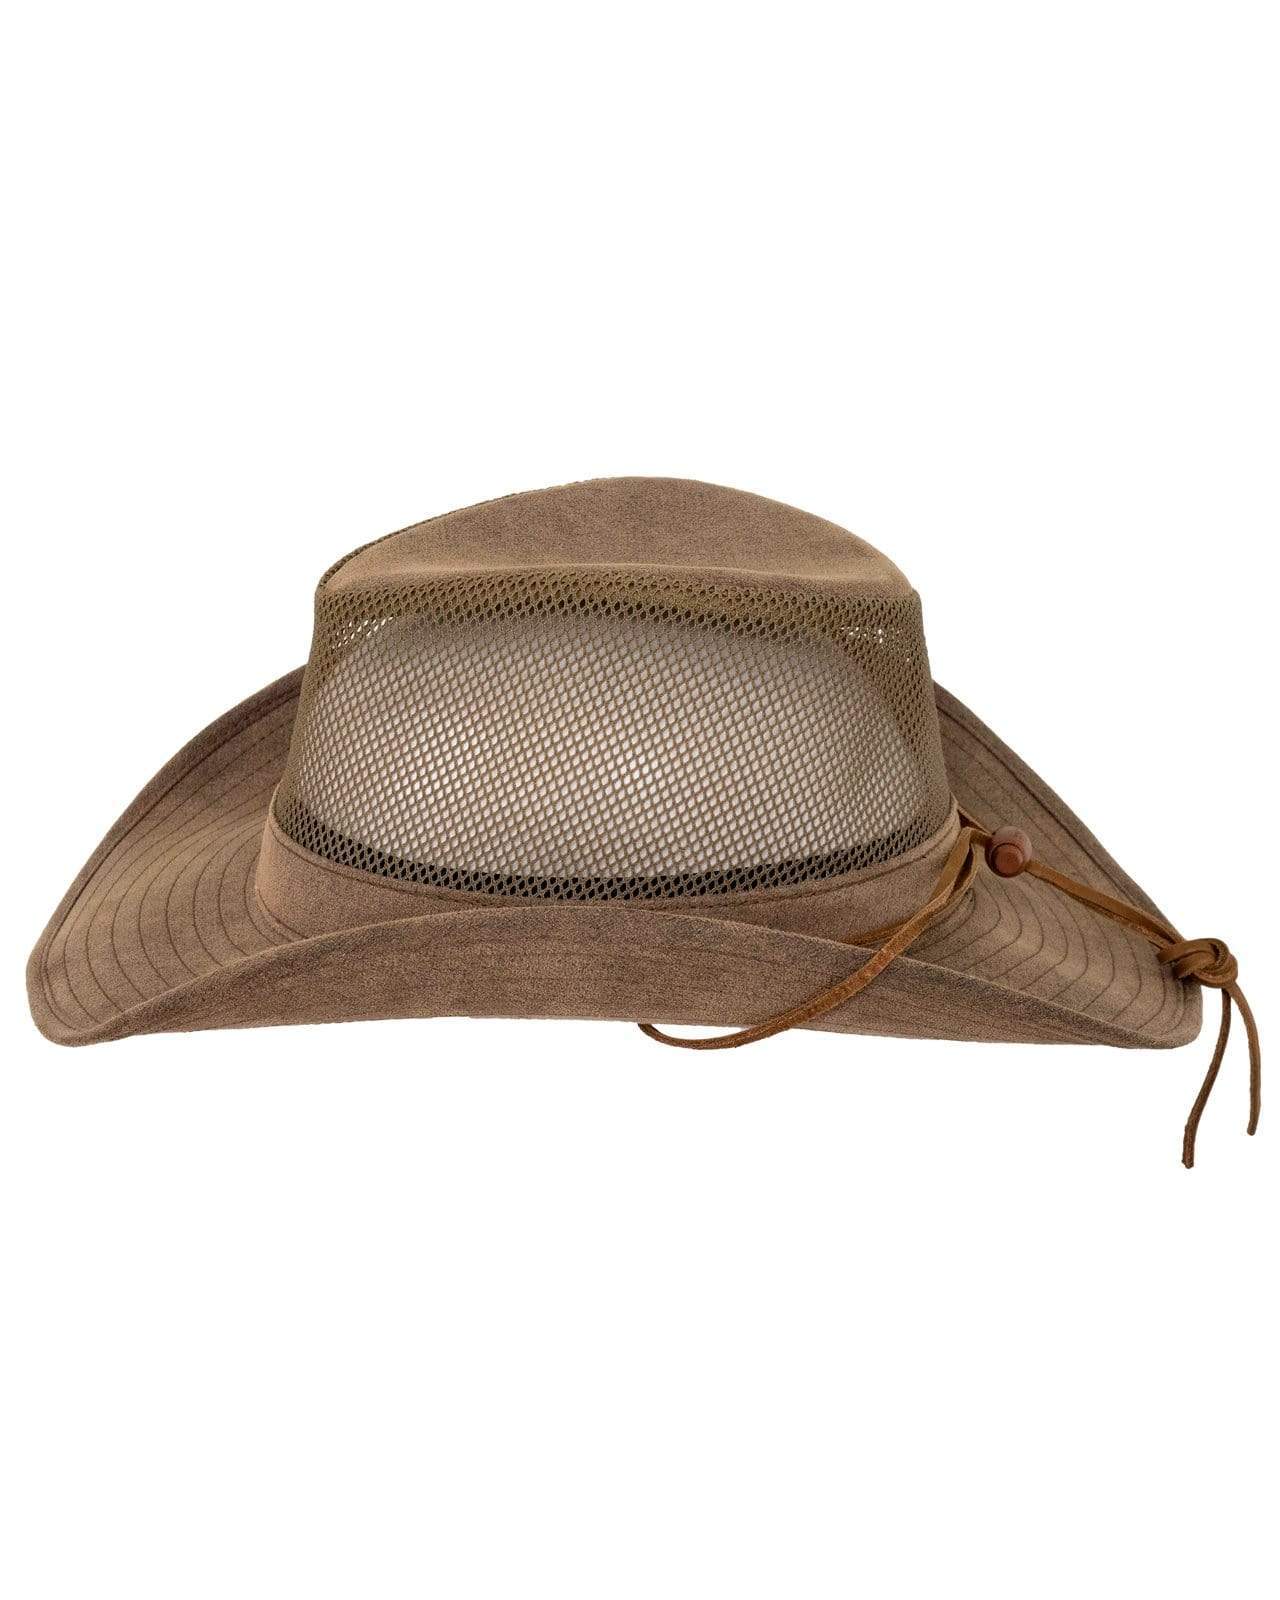 Outback Trading Company Knotting Hill Hats